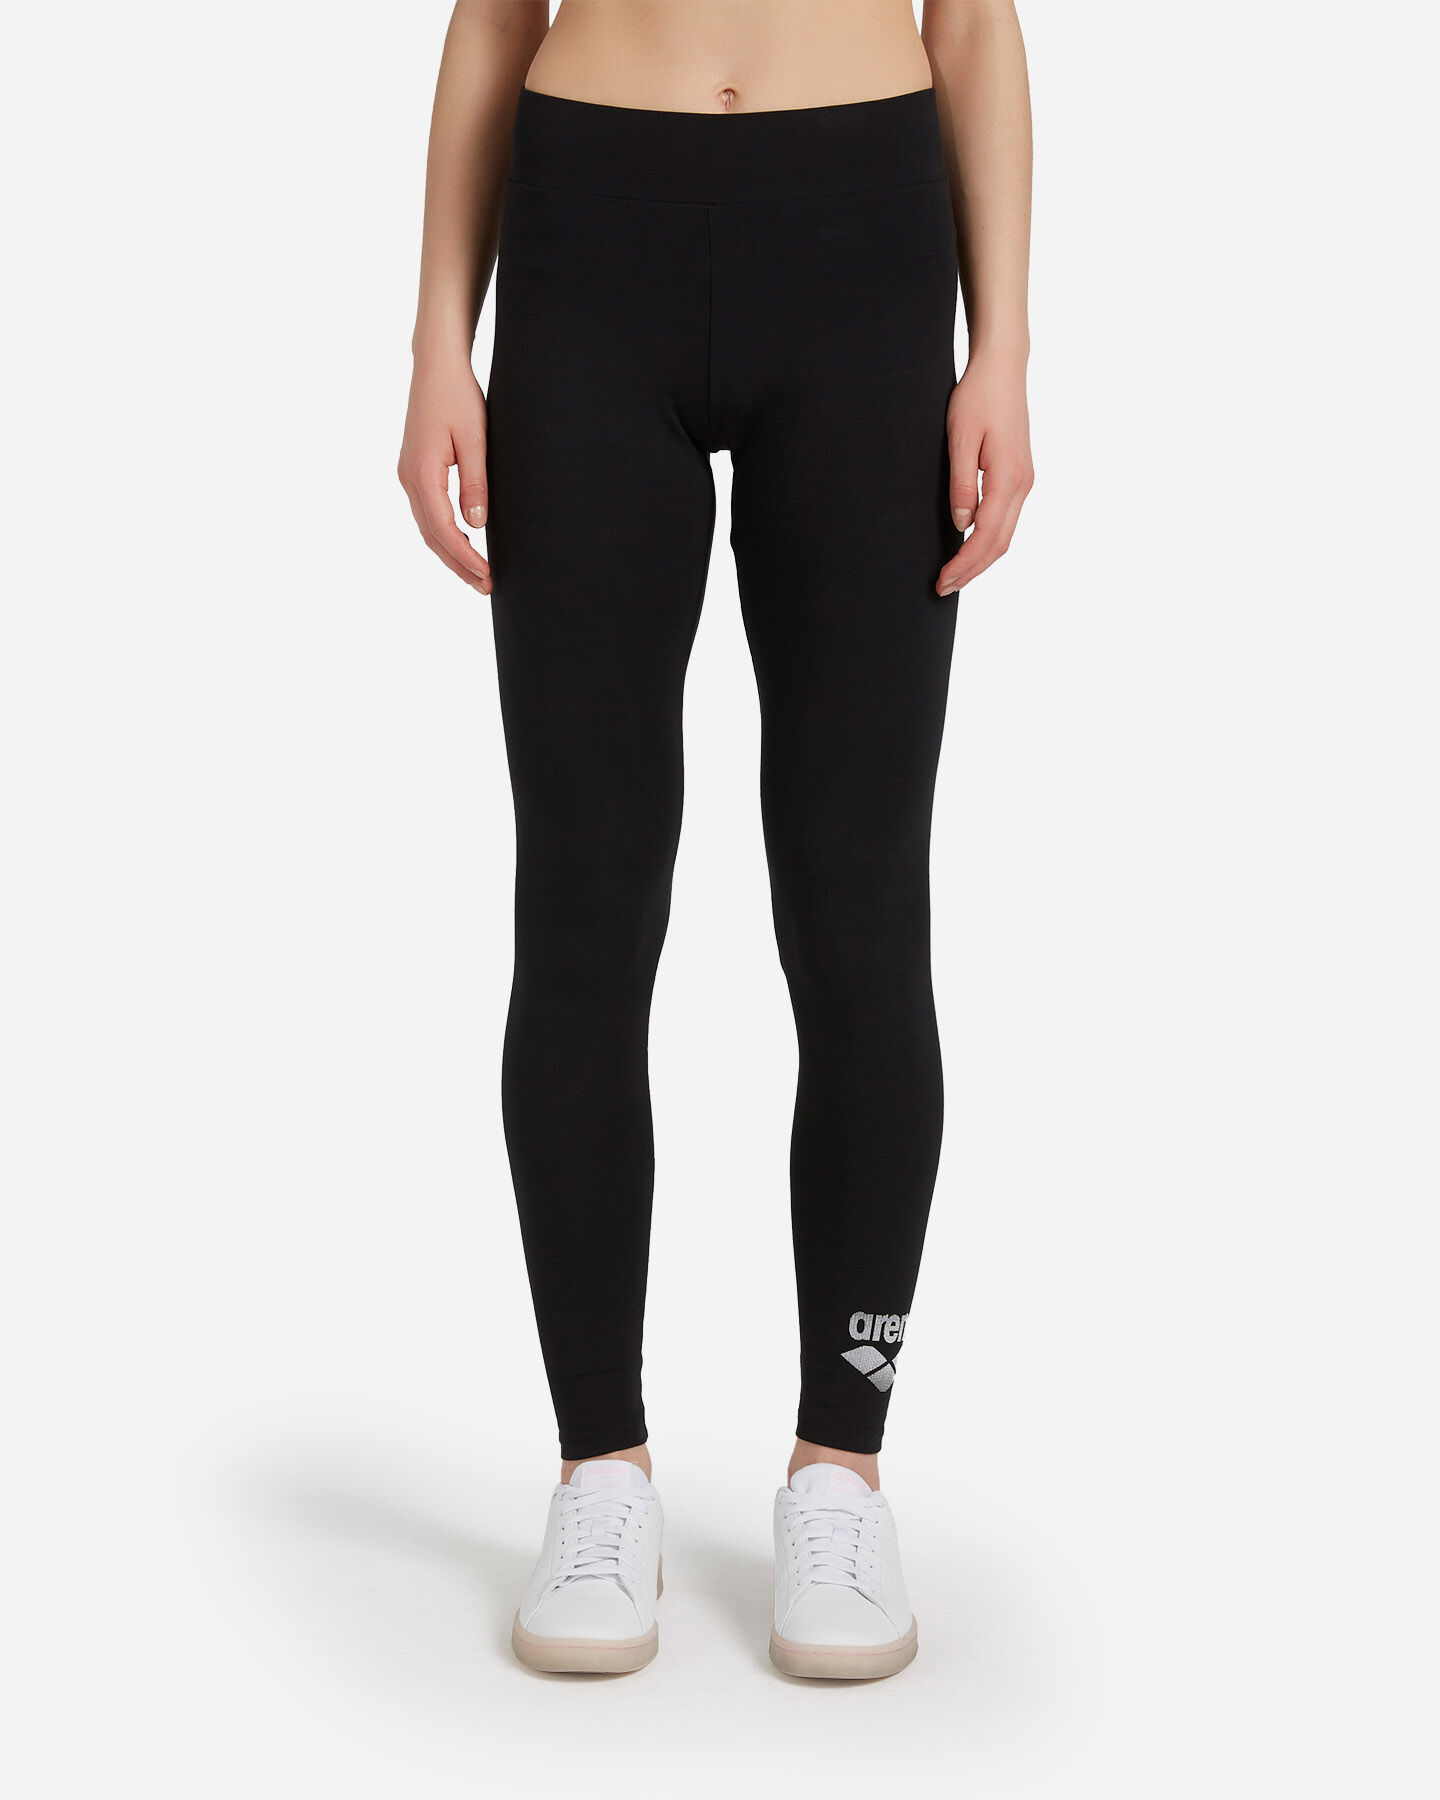 I'm fed up of wrecking leggings when climbing. What brand of leggings do you  ladies recommend? (preferably EU based companies) : r/climbergirls